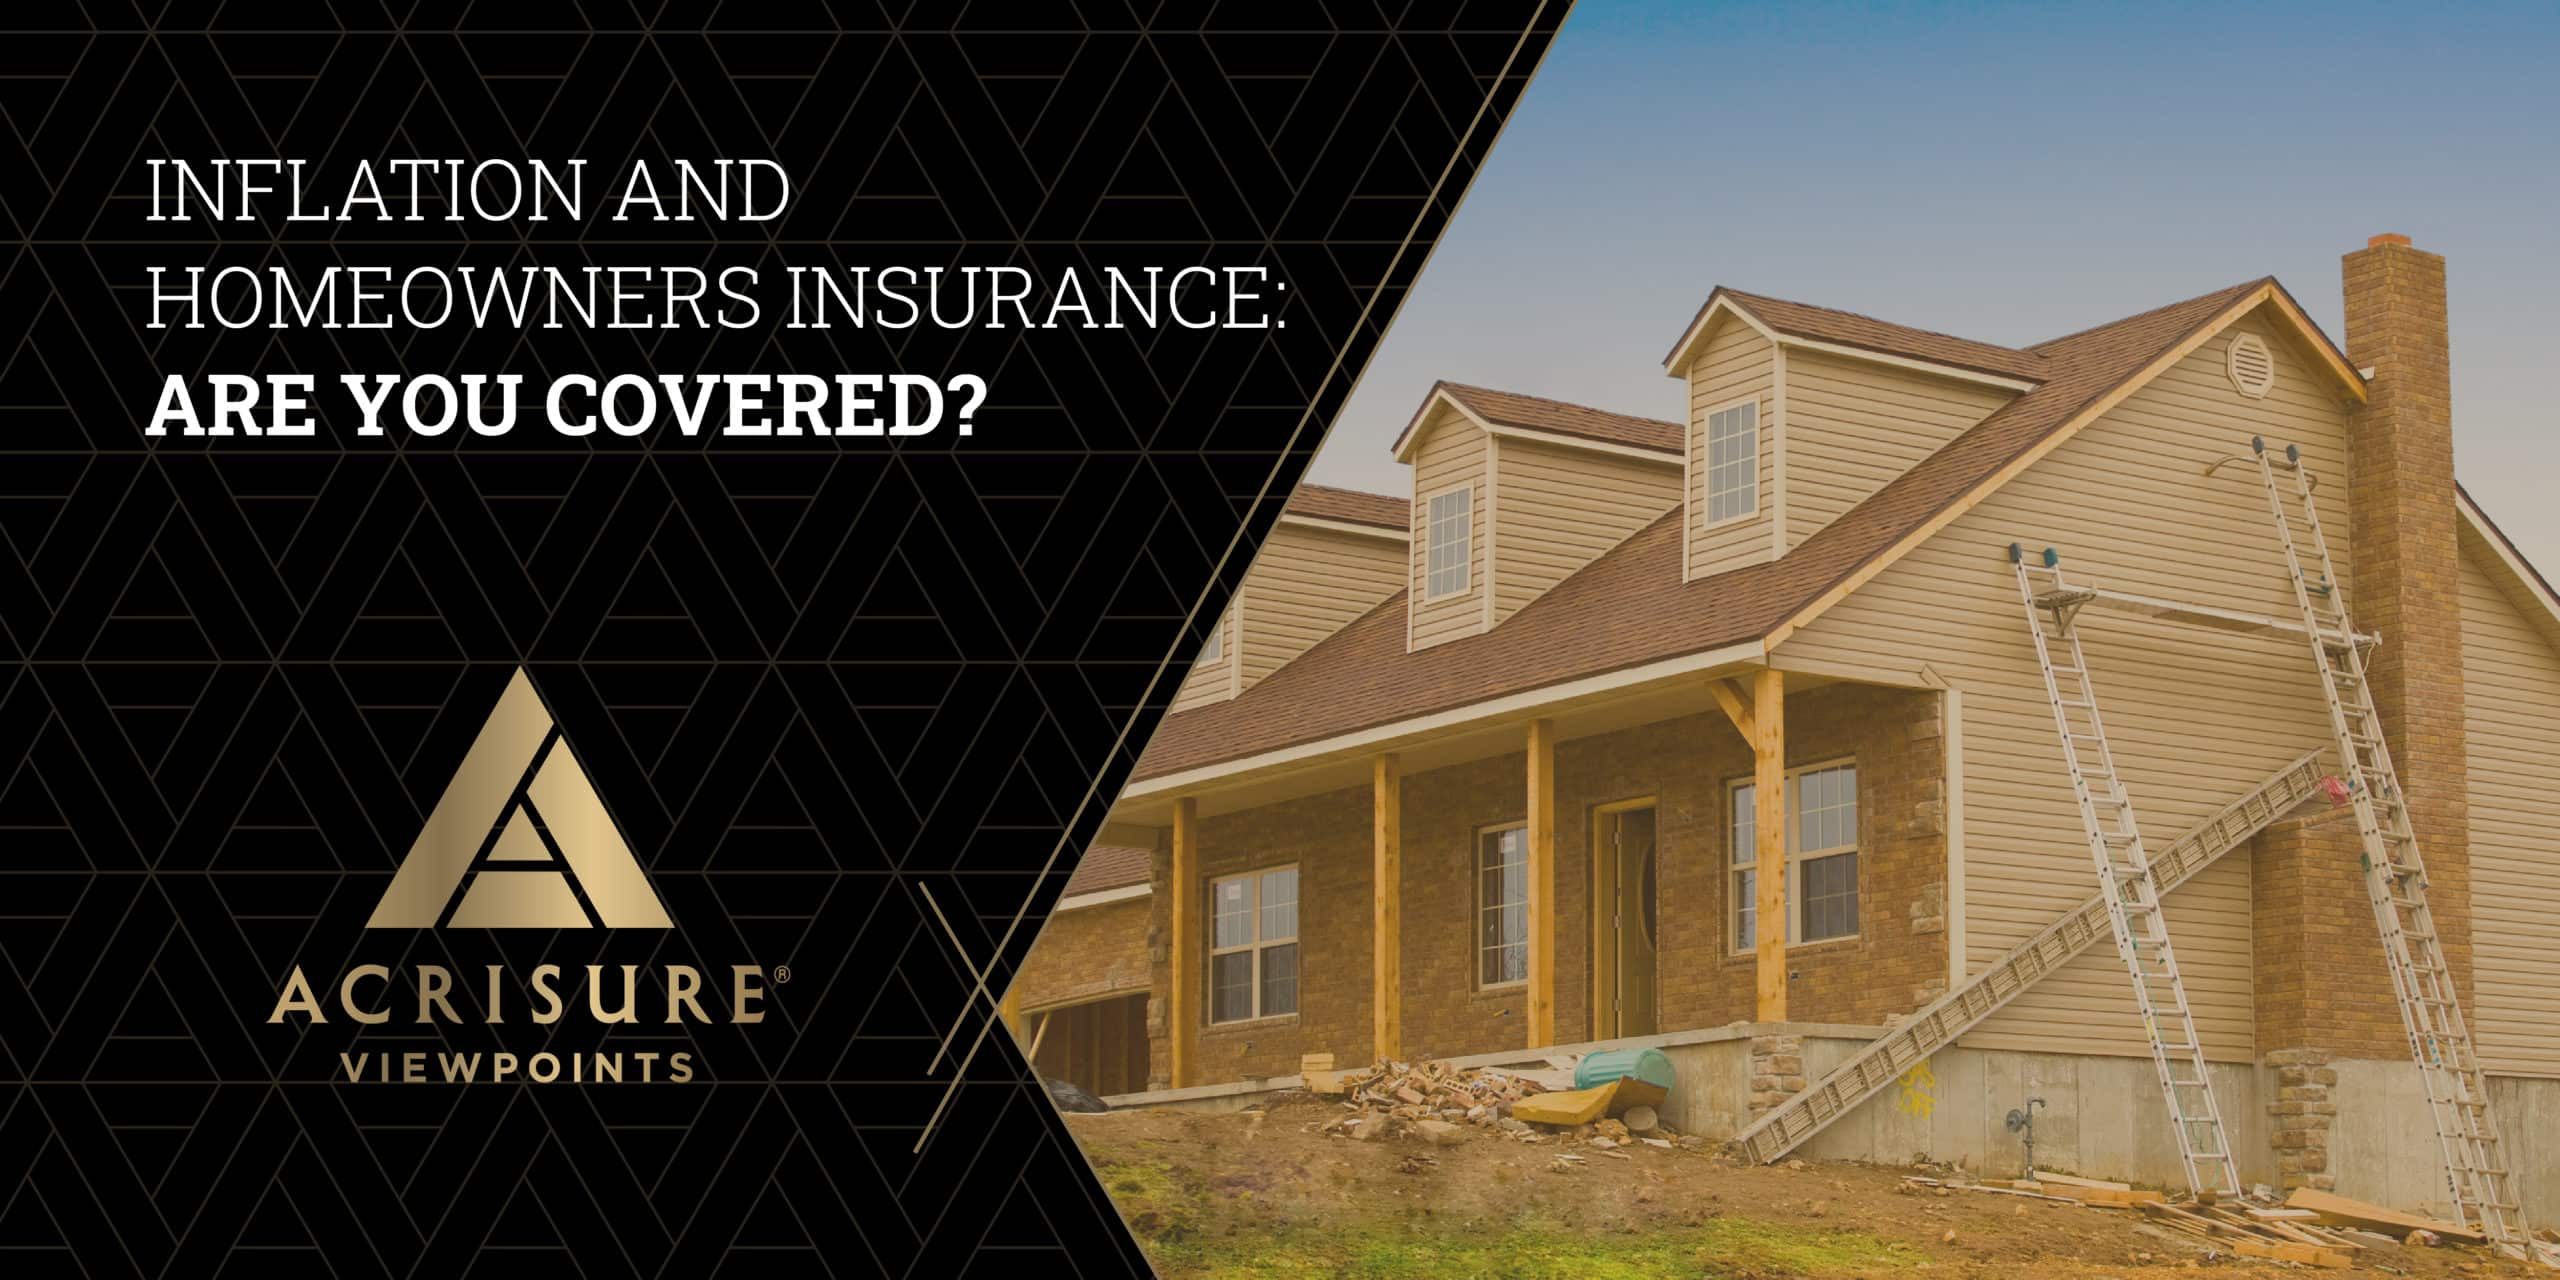 Inflation Homeowners Insurance Acrisure Viewpoints